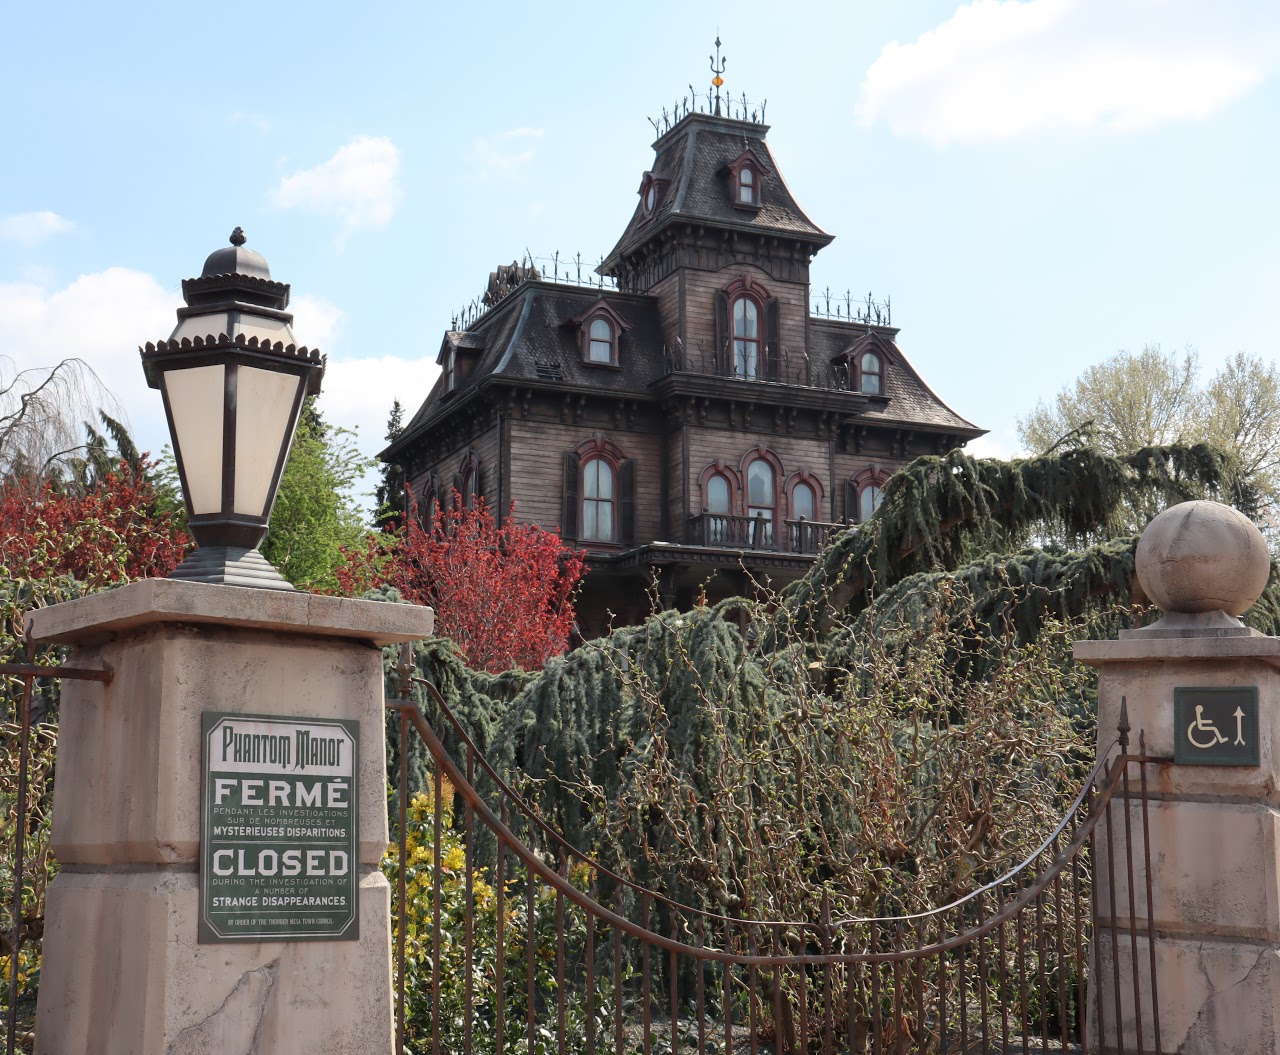 Re-opening Phantom Manor Announced - Travel to the Magic